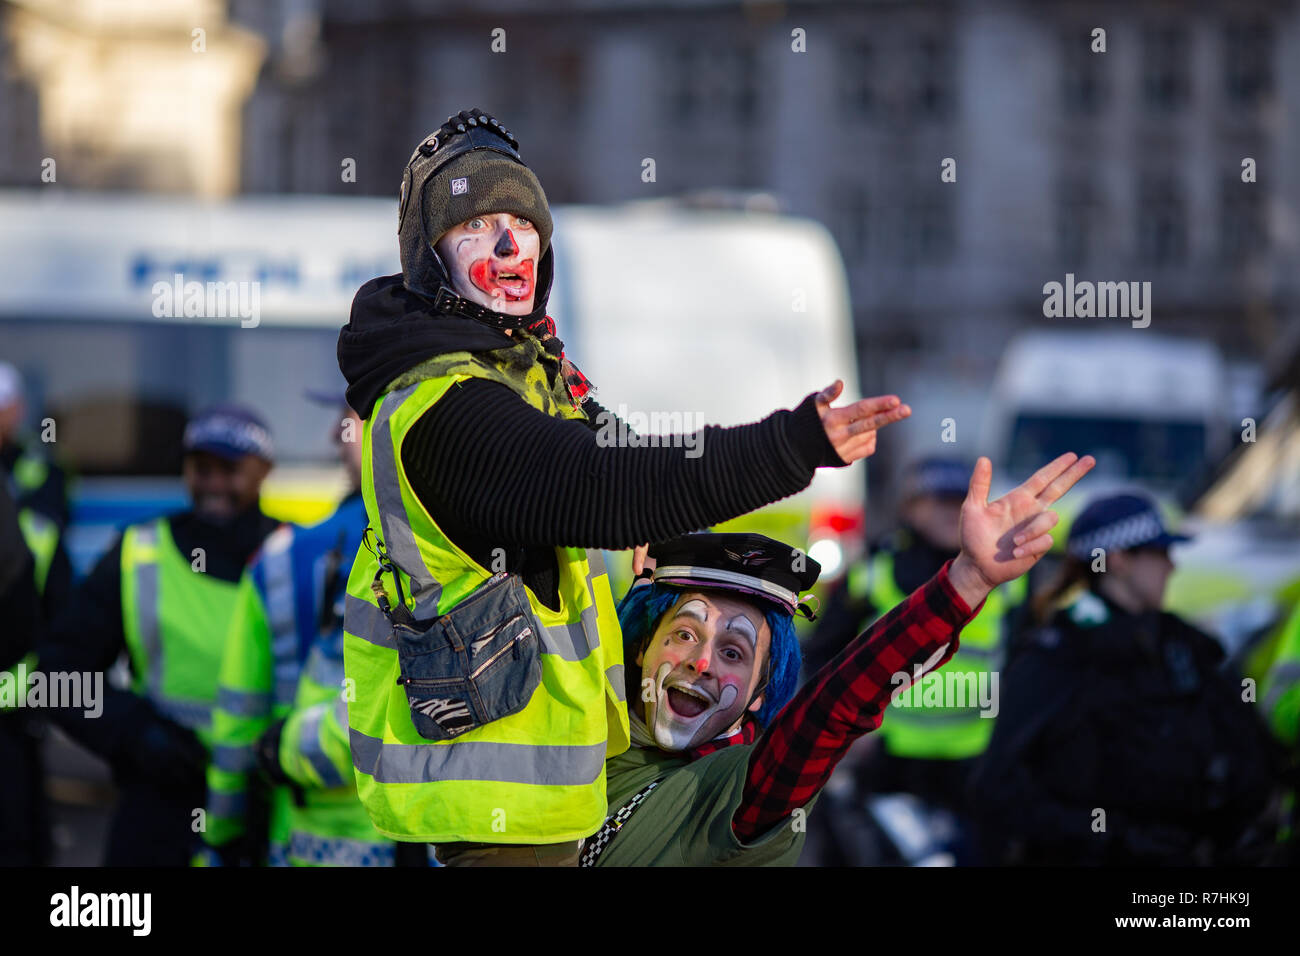 Anti-Facist demonstrators 'clown around' at the rally.  3,000 Pro-Brexit demonstrators and 15,000 Anti-Facist counter demonstrators took to the streets of London to voice their stance on the deal ahead of the key Brexit vote in parliament this Tuesday. Stock Photo